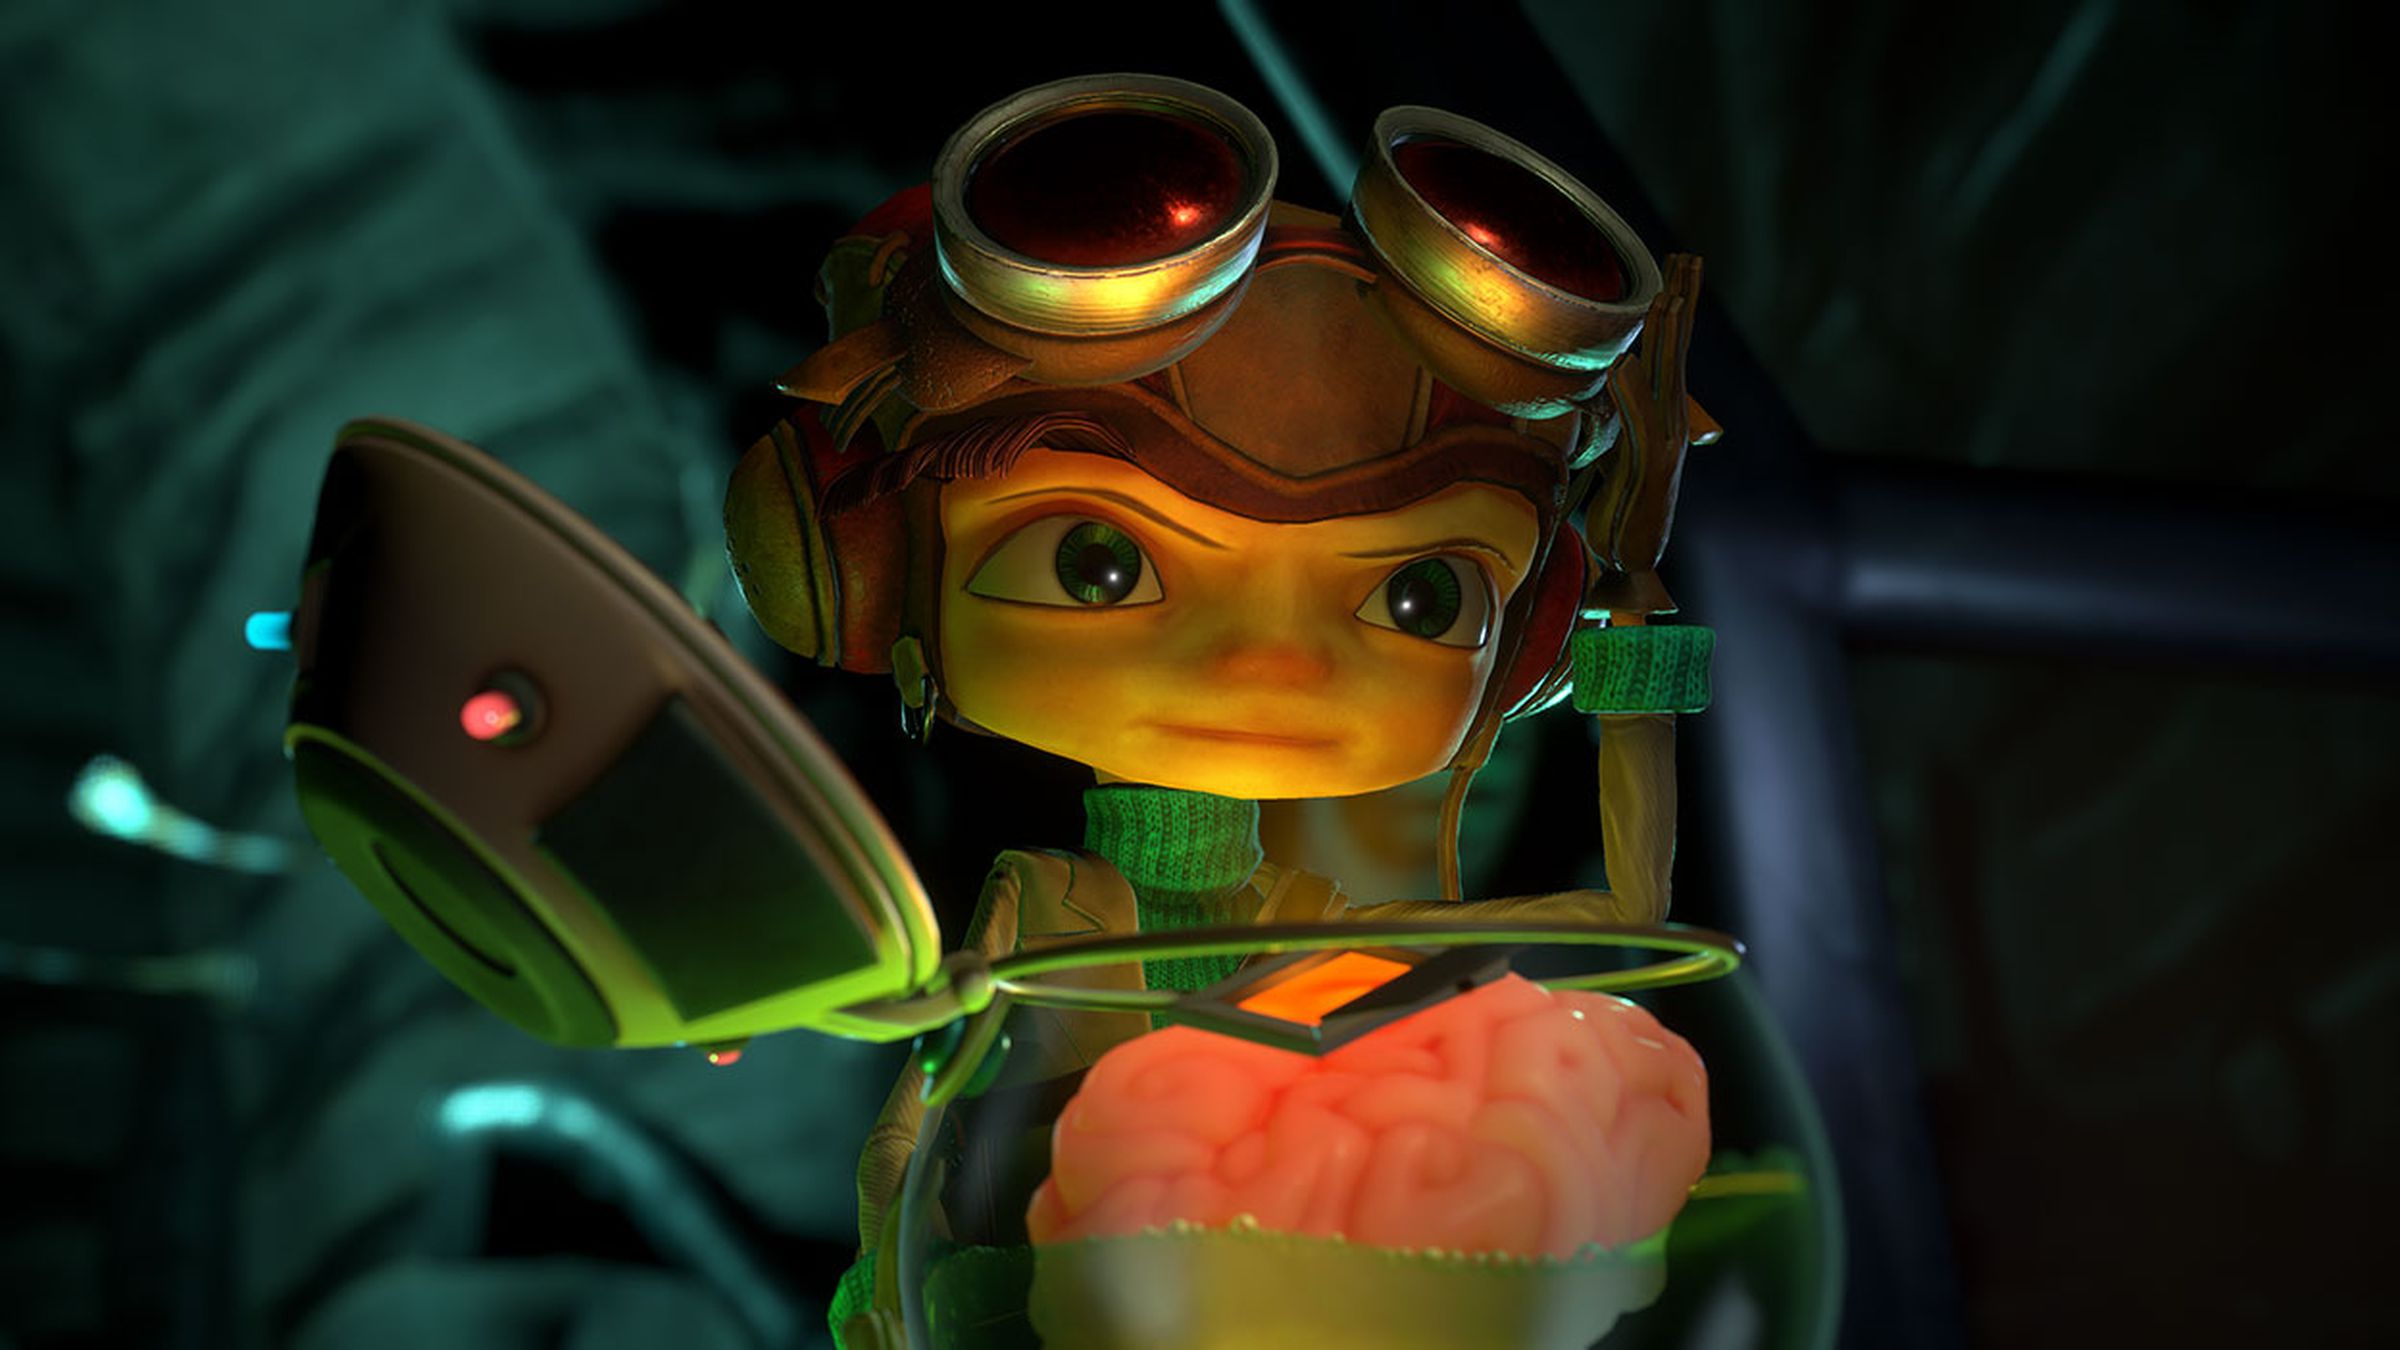 Psychonauts 2 is the long-awaited sequel to the original Xbox title from 2005.